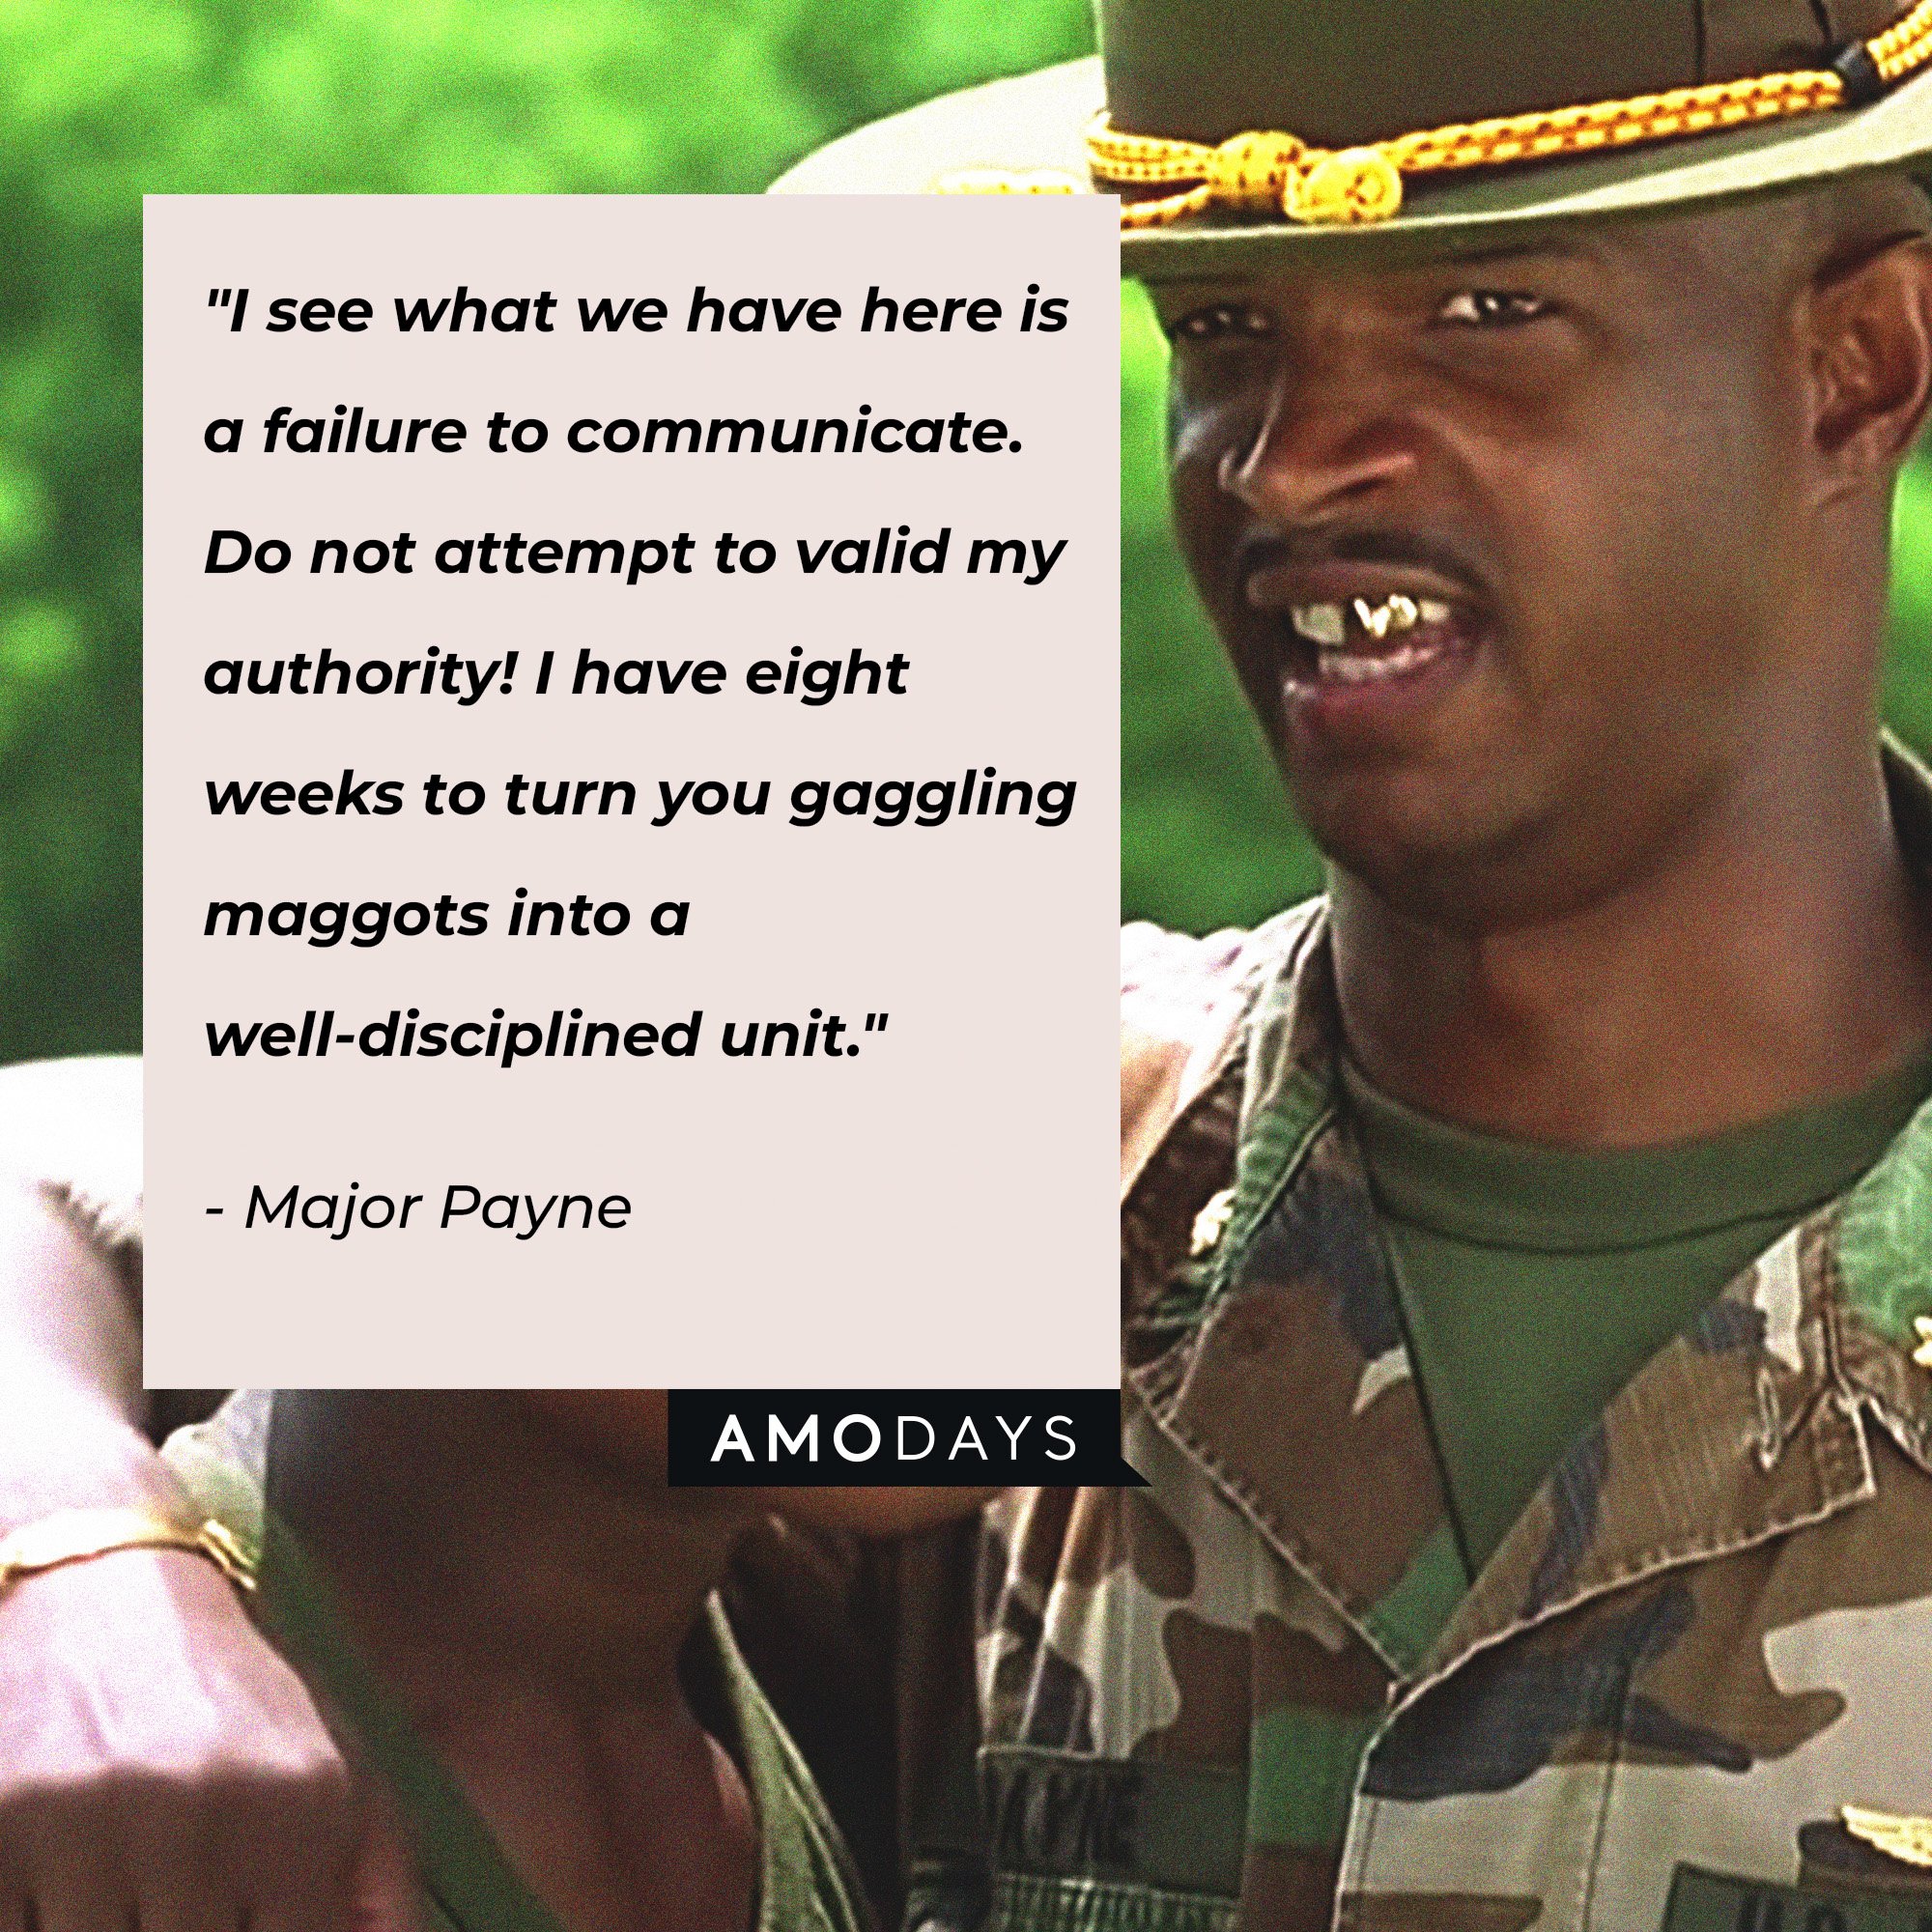 Major Payne's quote: "I see what we have here is a failure to communicate. Do not attempt to valid my authority! I have eight weeks to turn you gaggling maggots into a well-disciplined unit."  | Source: Amodays